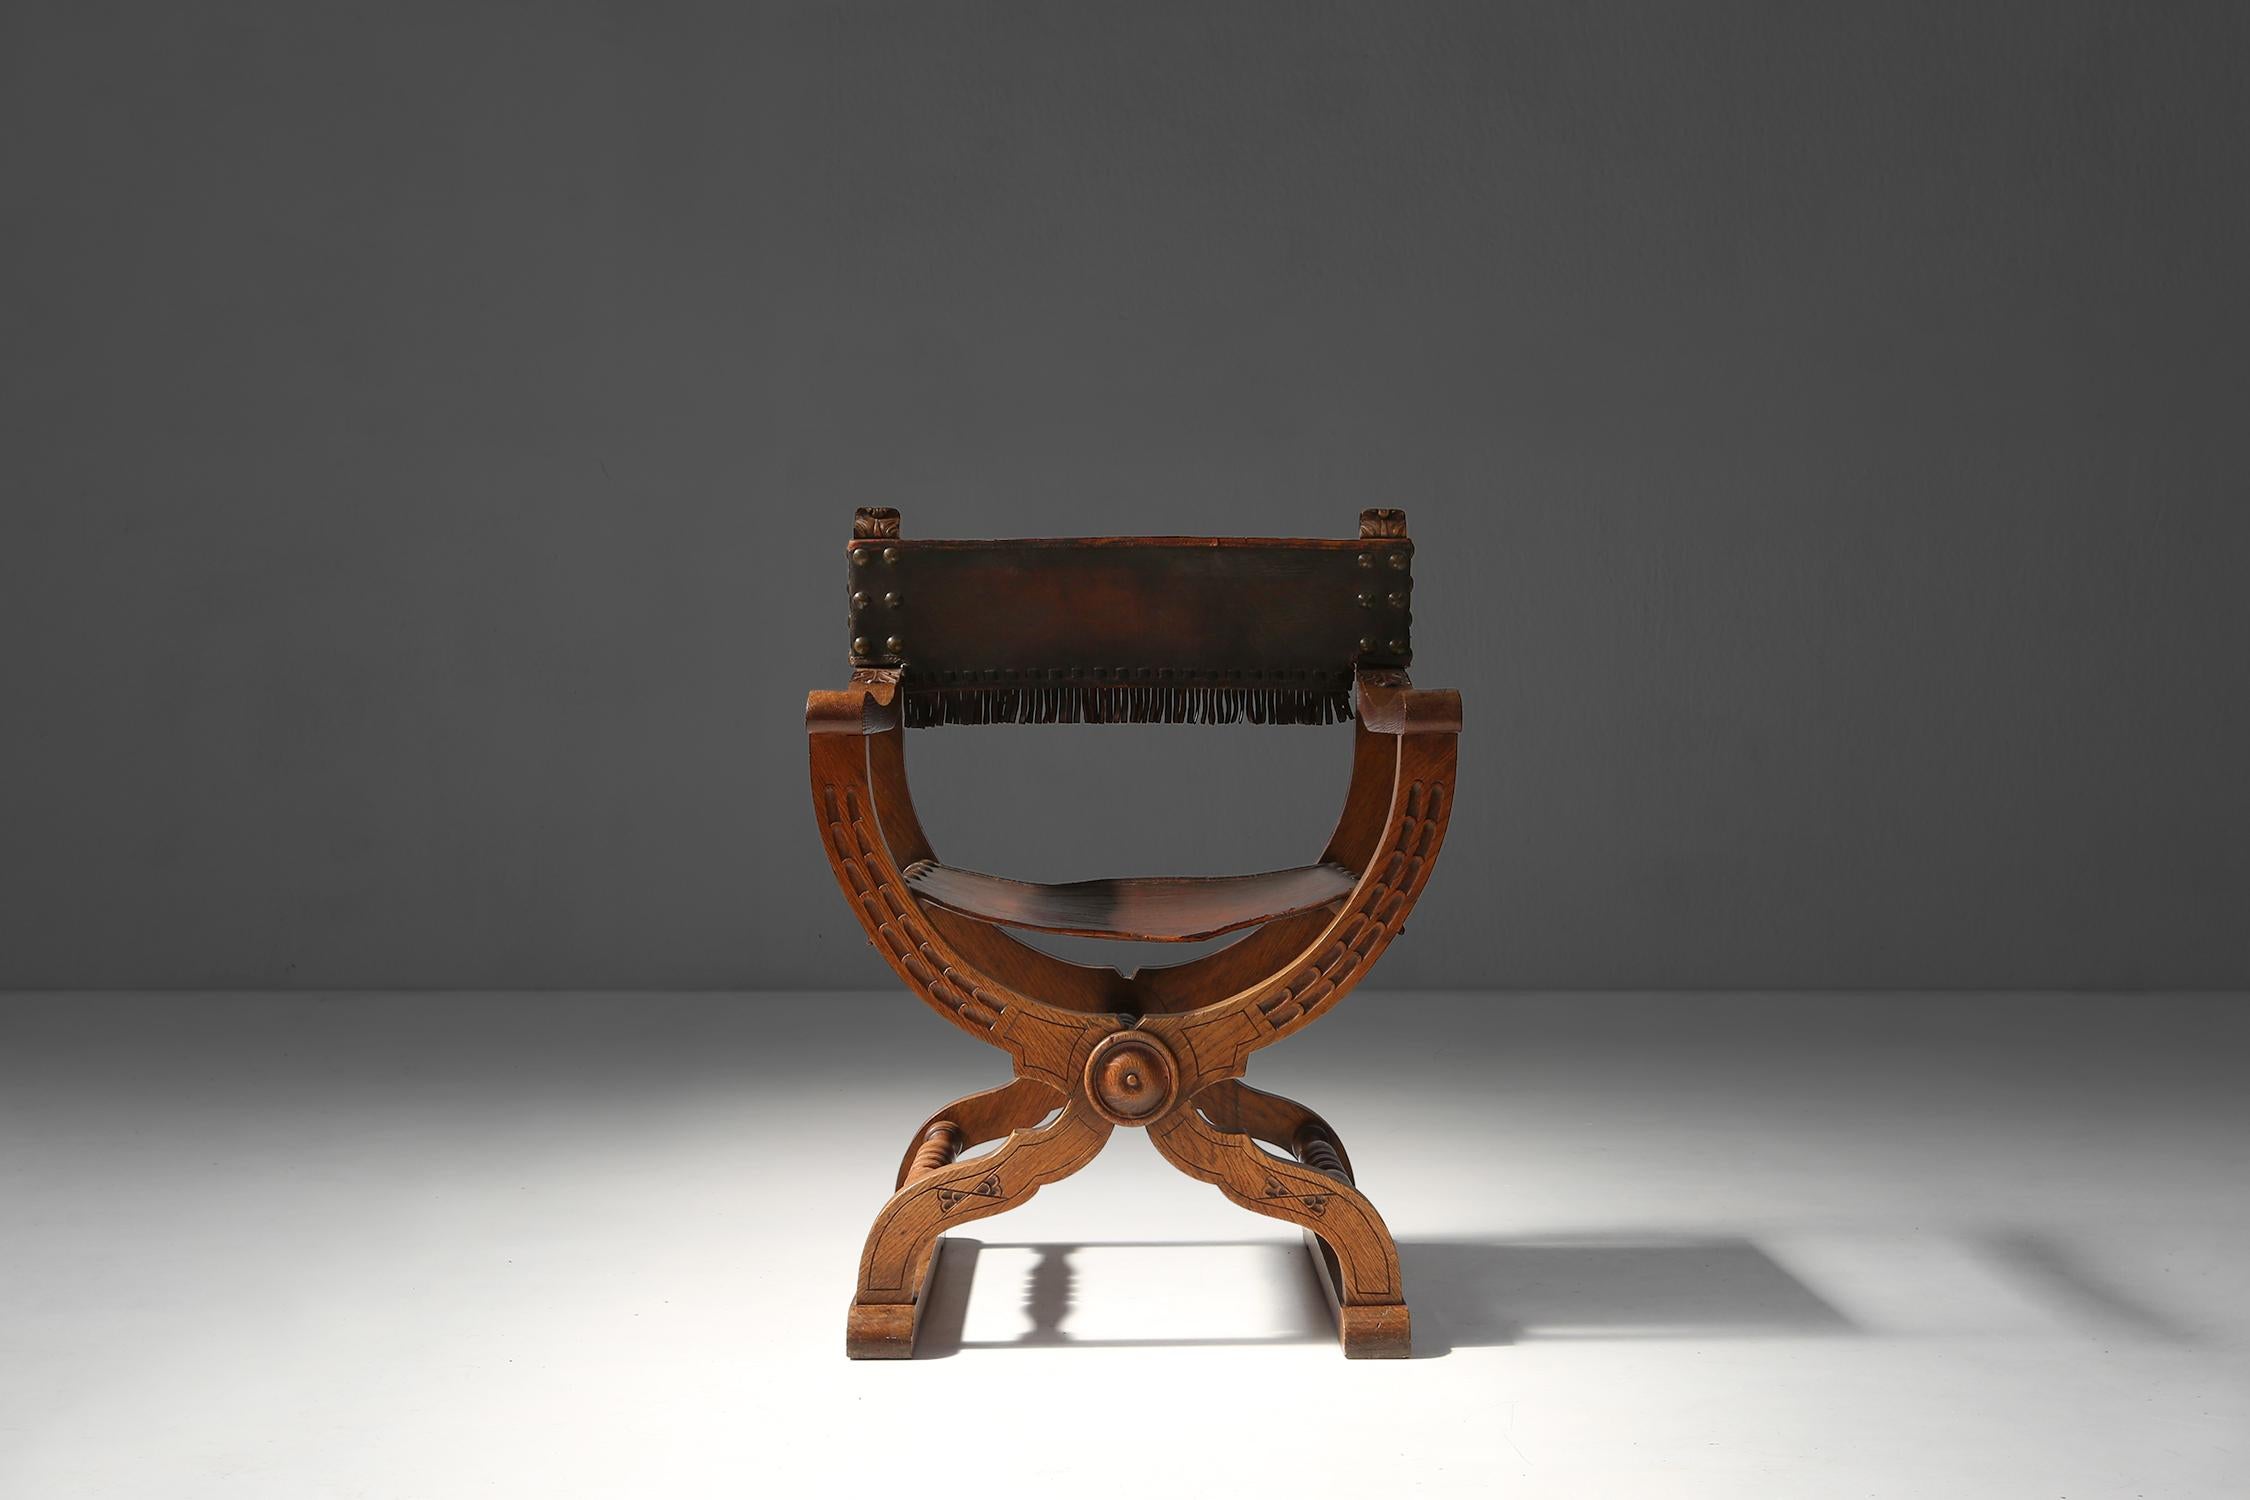 This Neo renaissance throne chair is a unique and elegant piece of furniture that can decorate any room. This chair was made around 1890, during the period of the Neo Renaissance style, which is characterized by the use of classical elements and